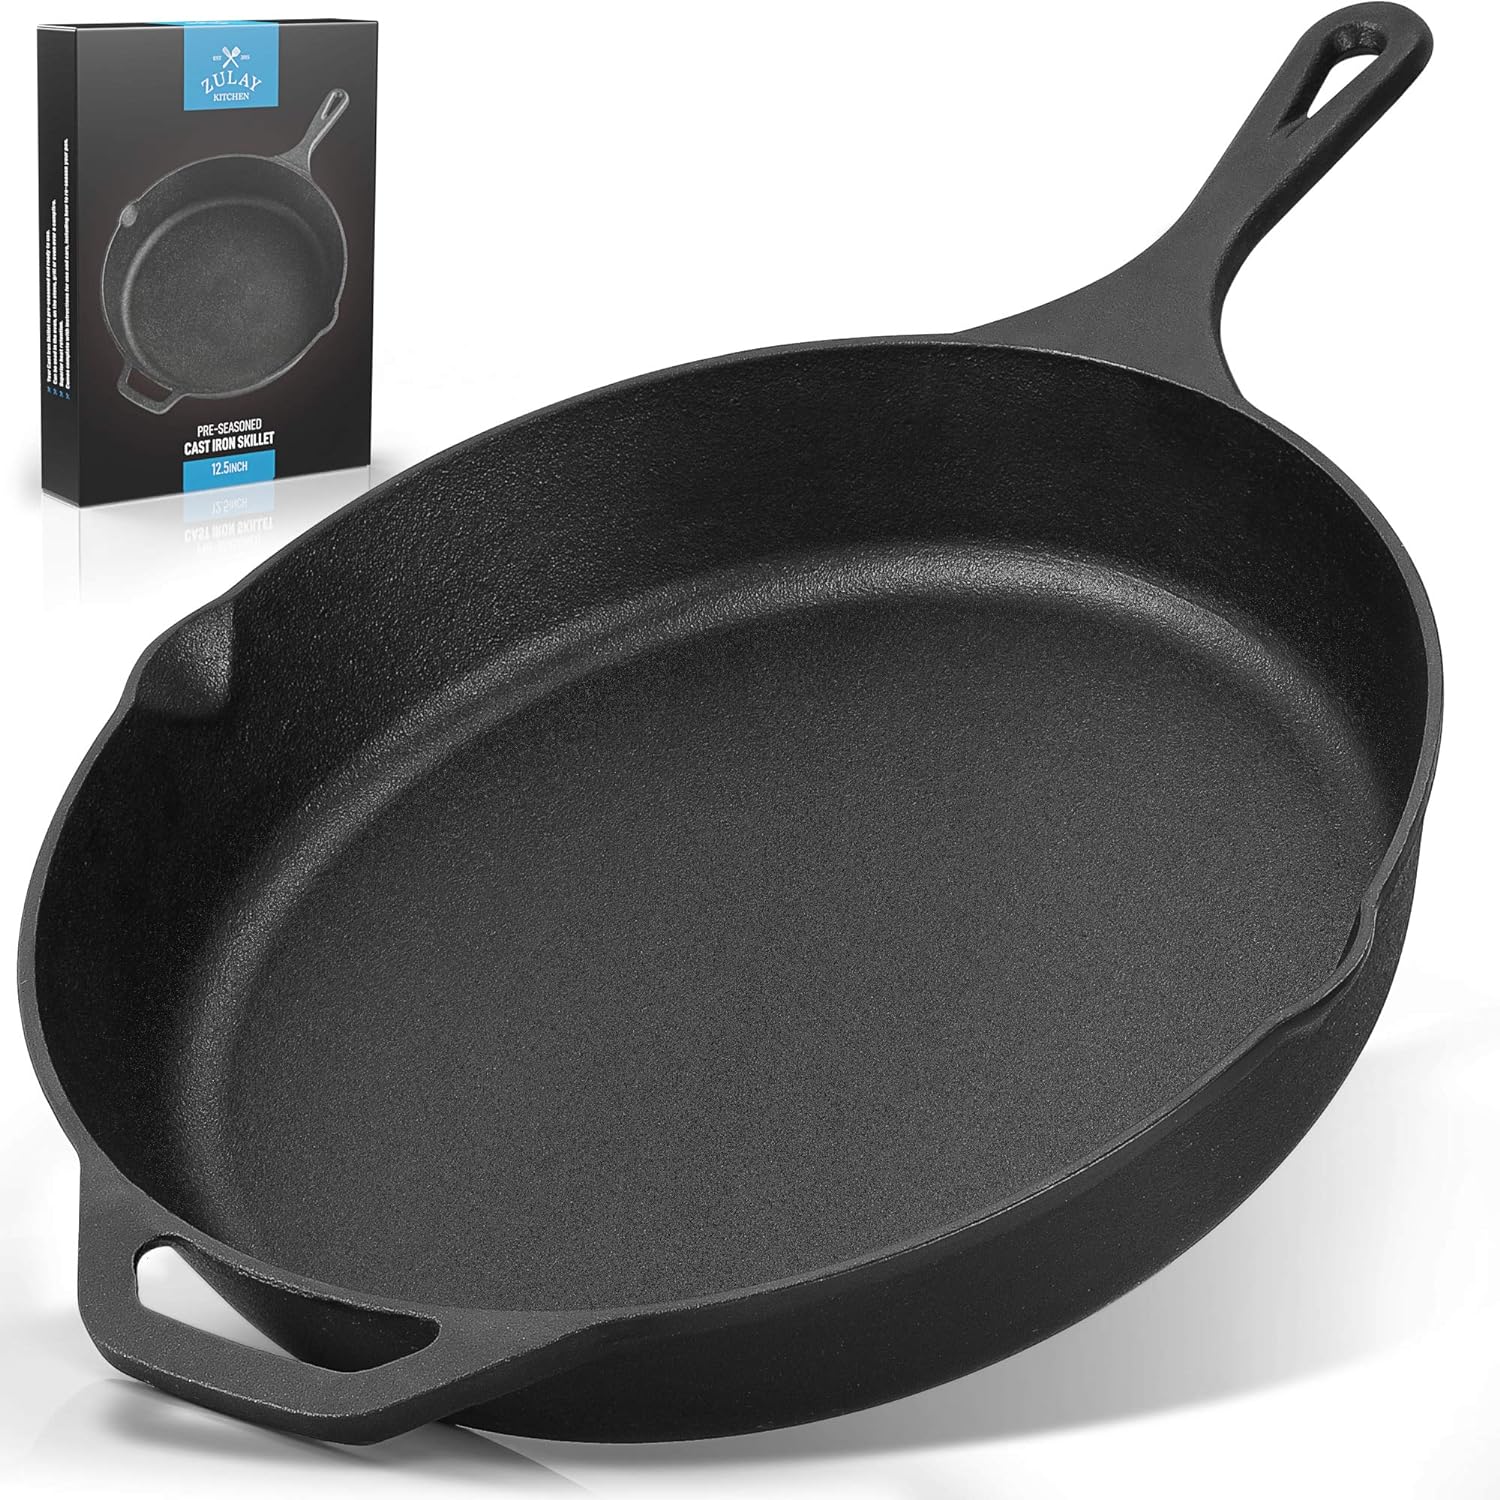 Cast Iron Skillet by Zulay Kitchen